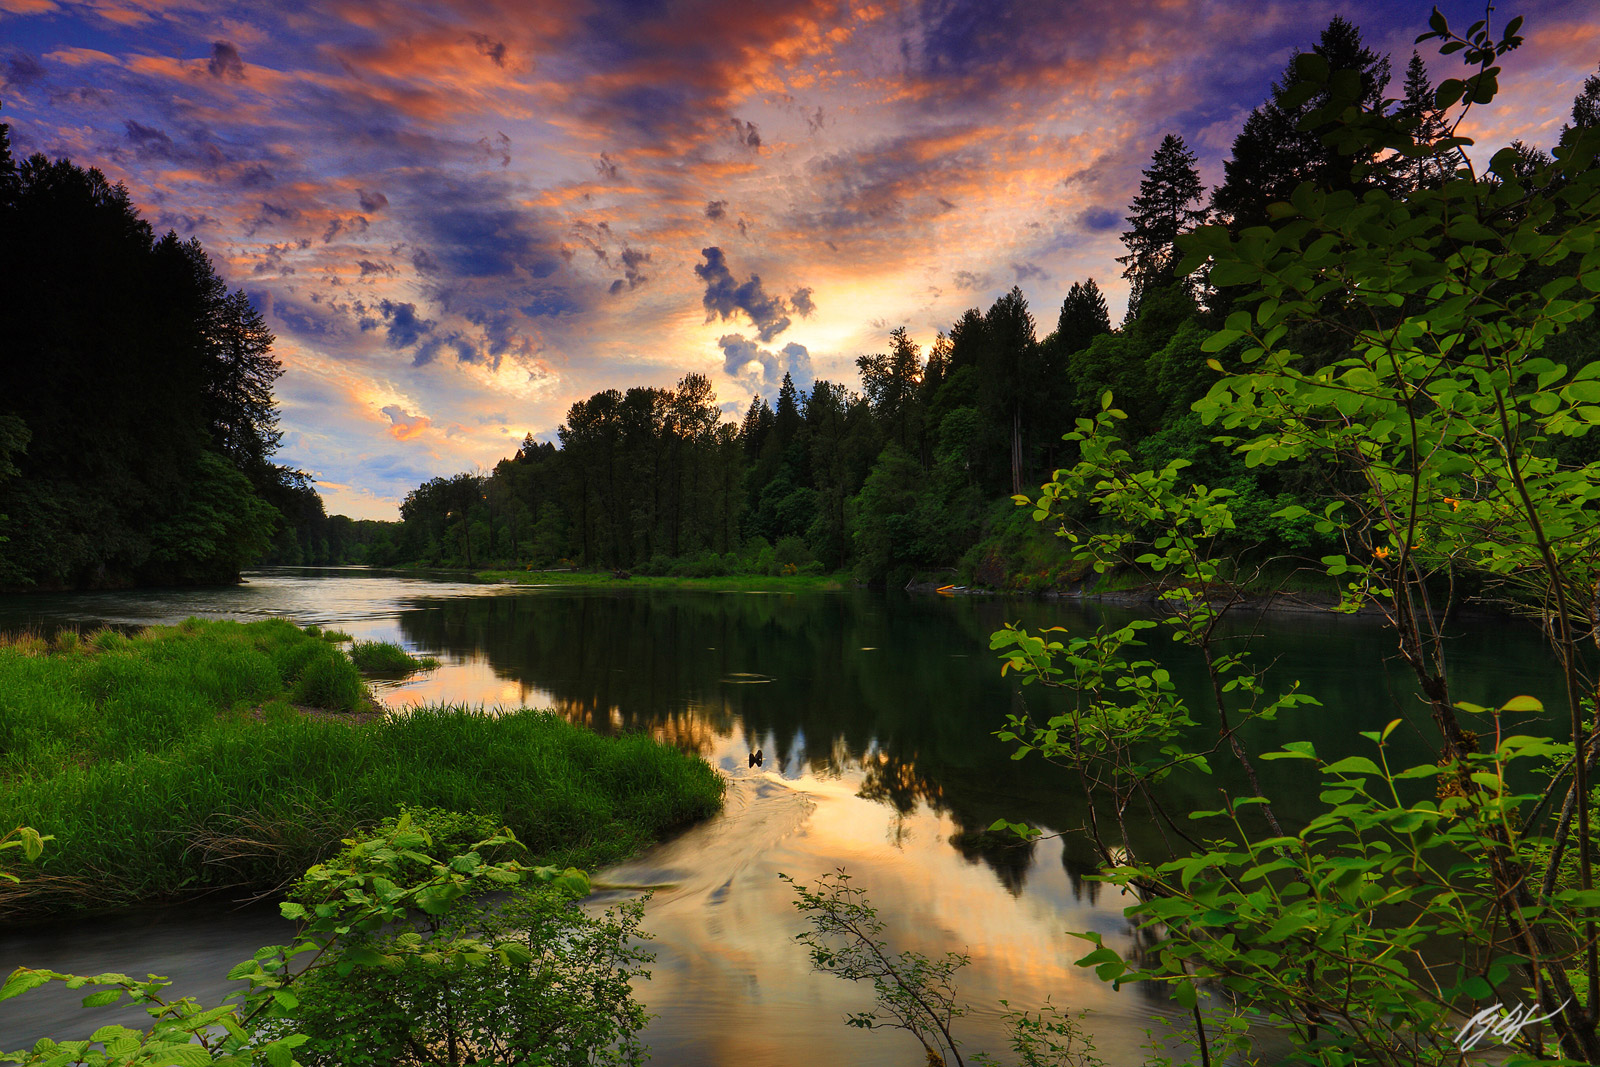 Sunset Reflections on the Cedar River in Washington